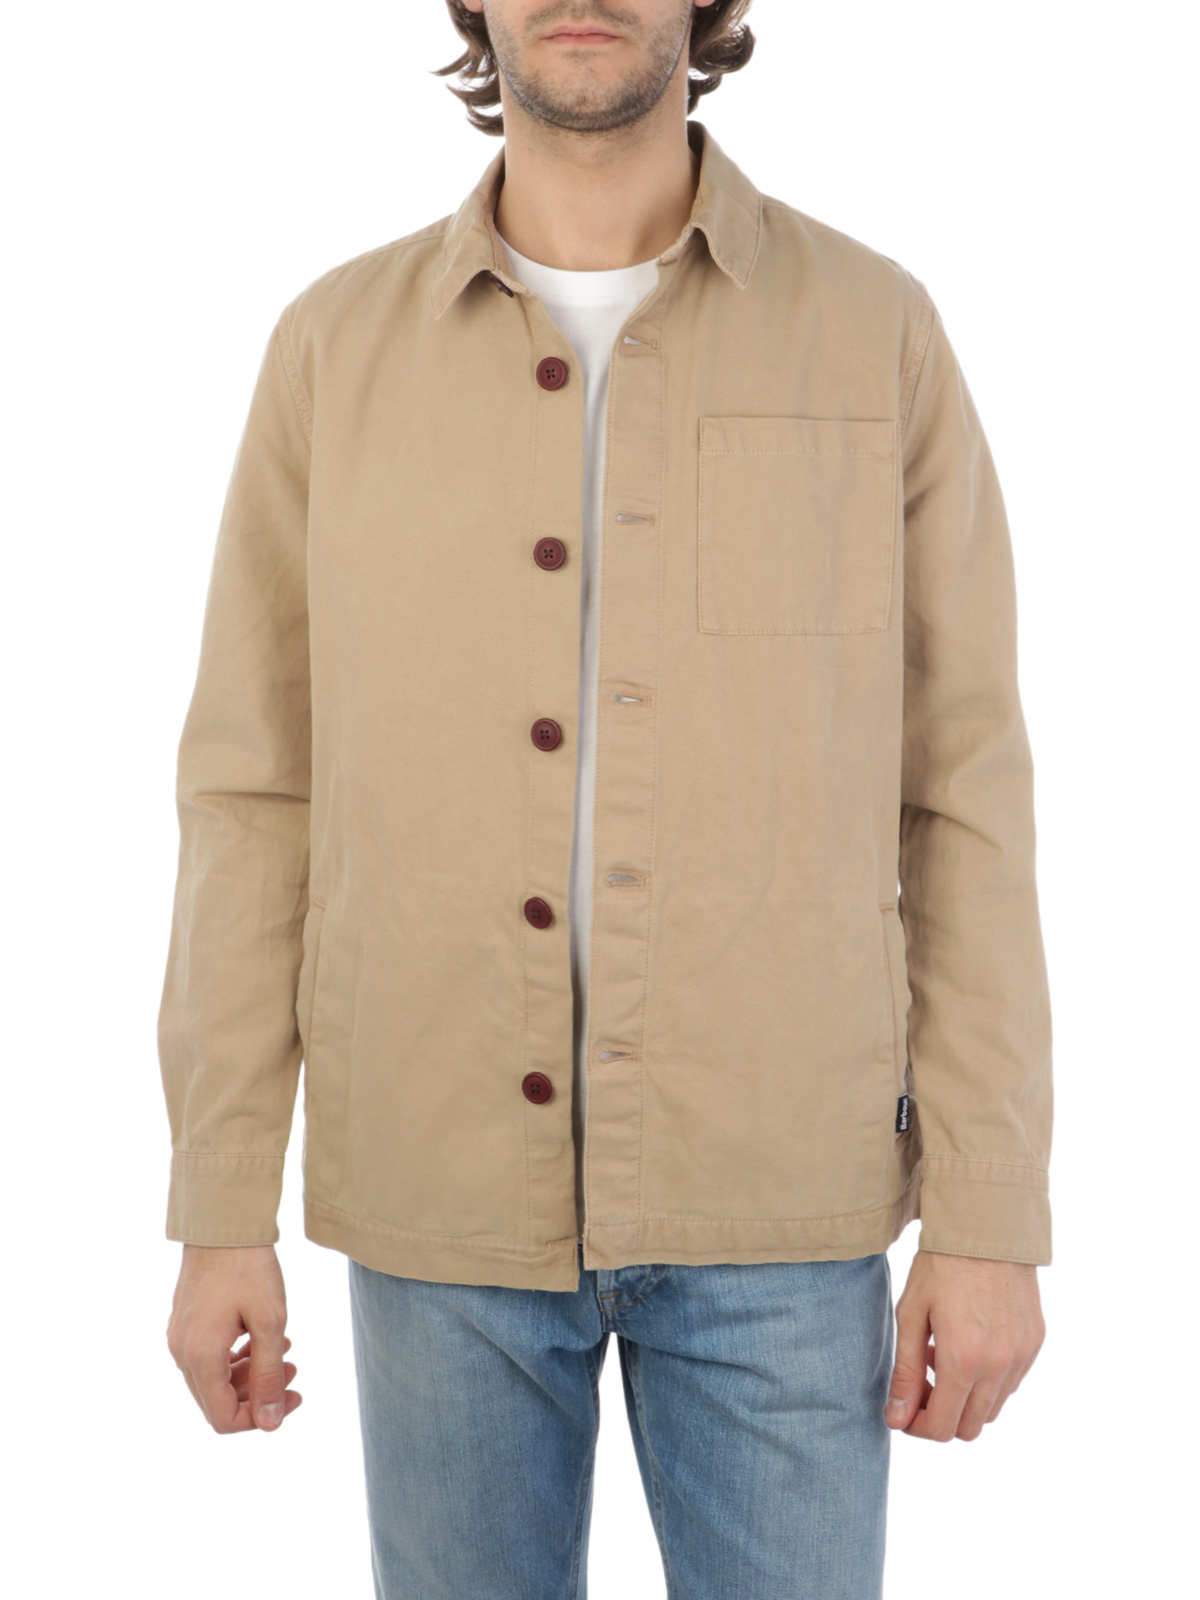 Immagine di BARBOUR | Giacca Camicia Uomo Washed Overshirt